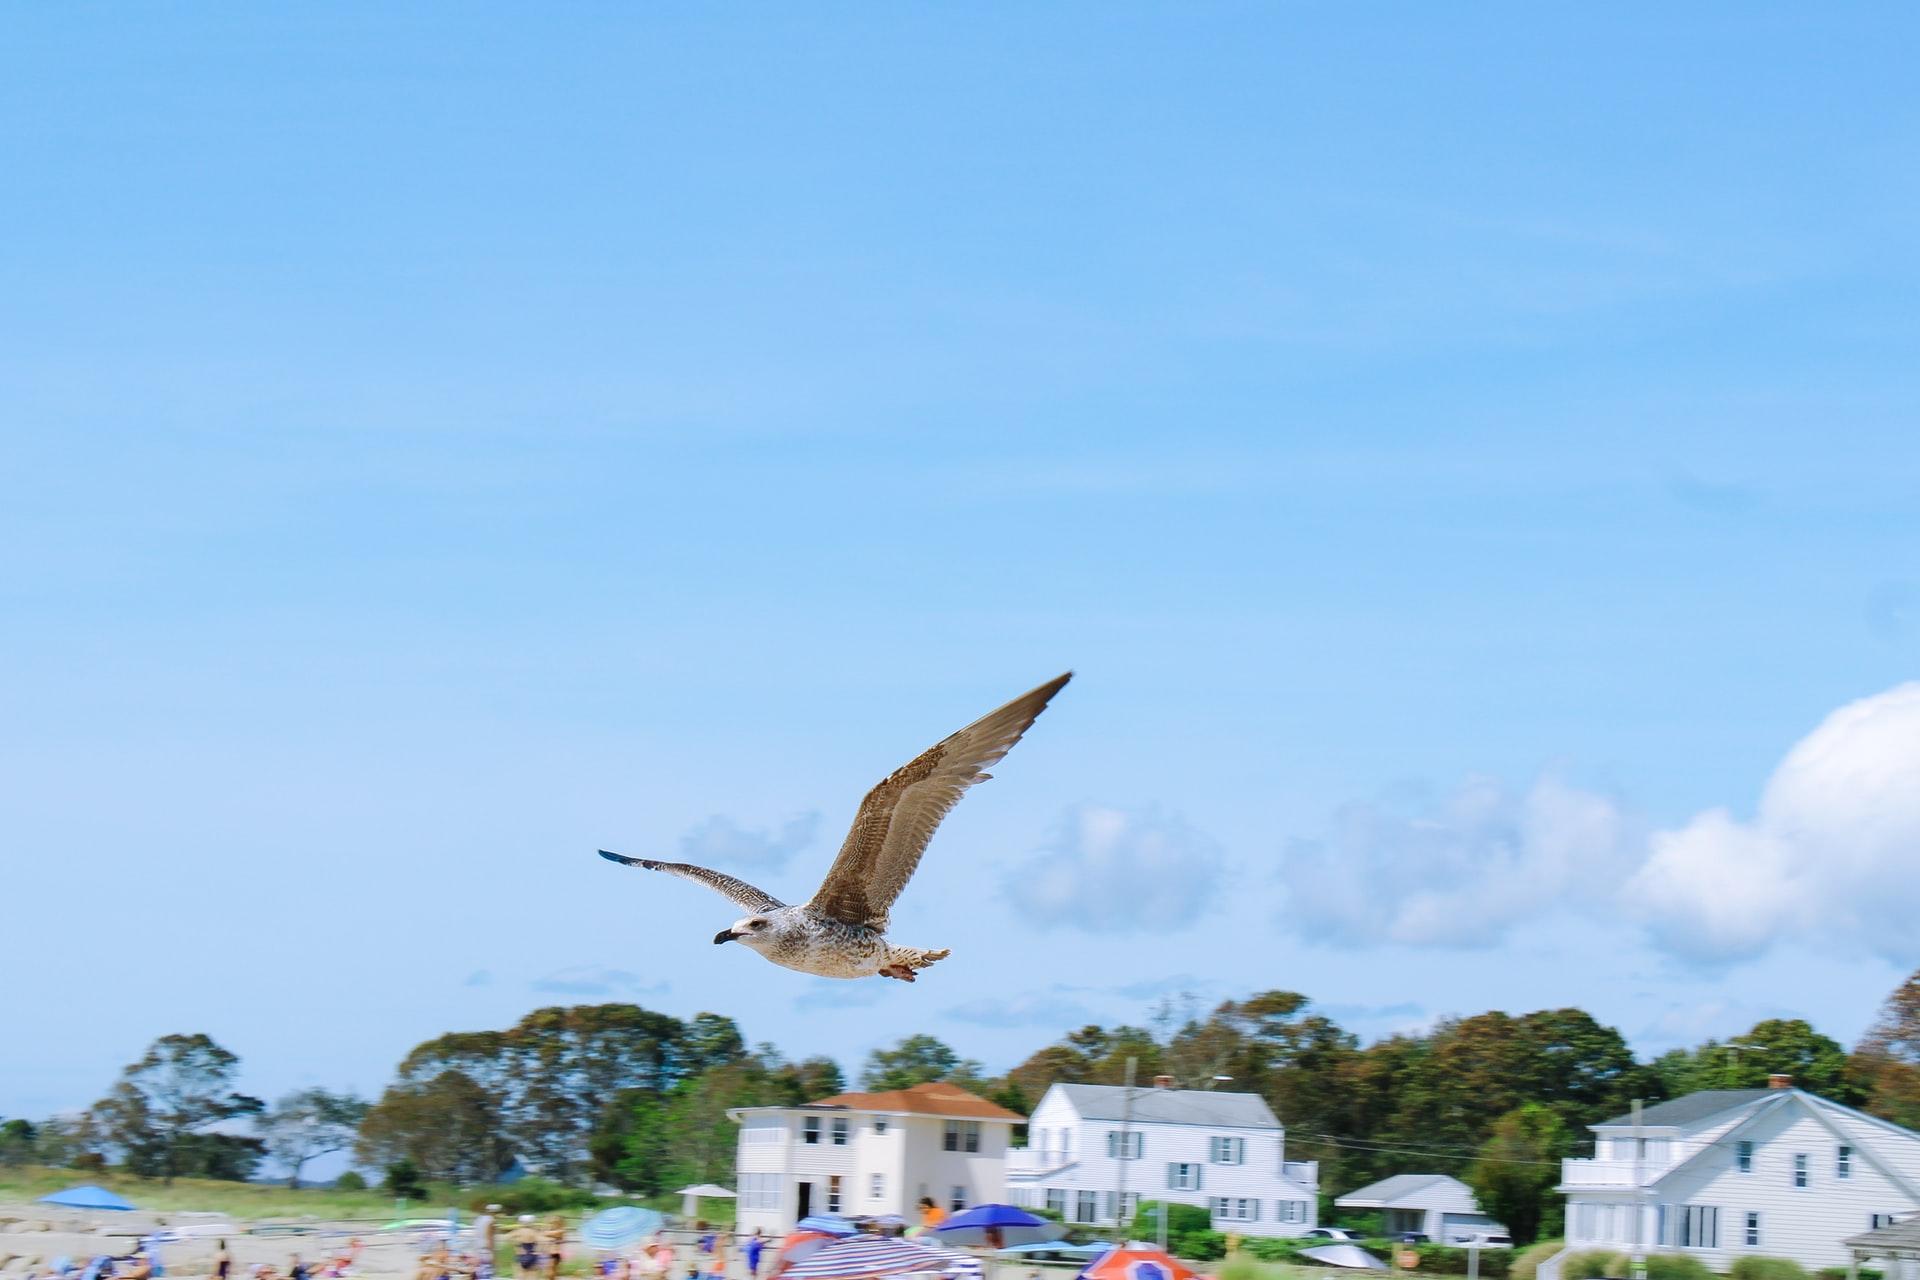 A seagull takes flight over a crowded beach in Old Lyme